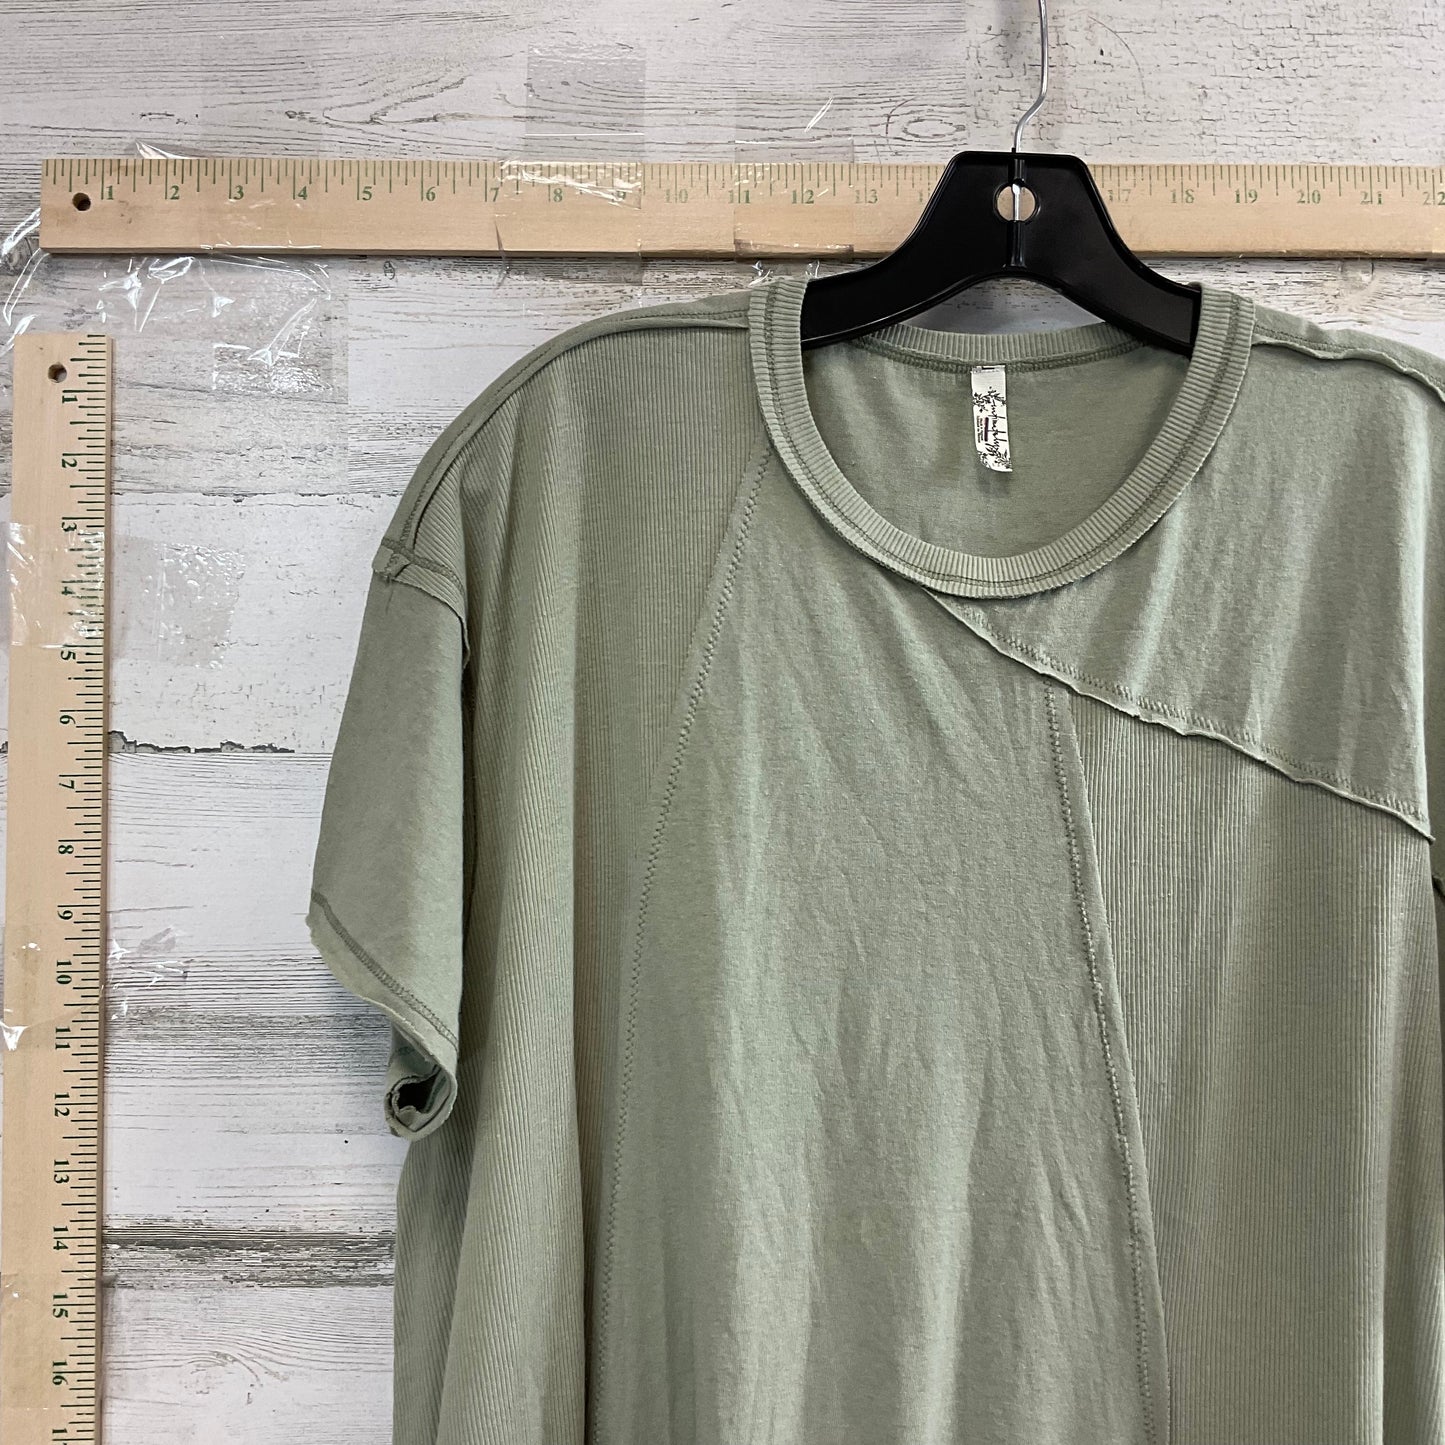 Green Top Short Sleeve Free People, Size S